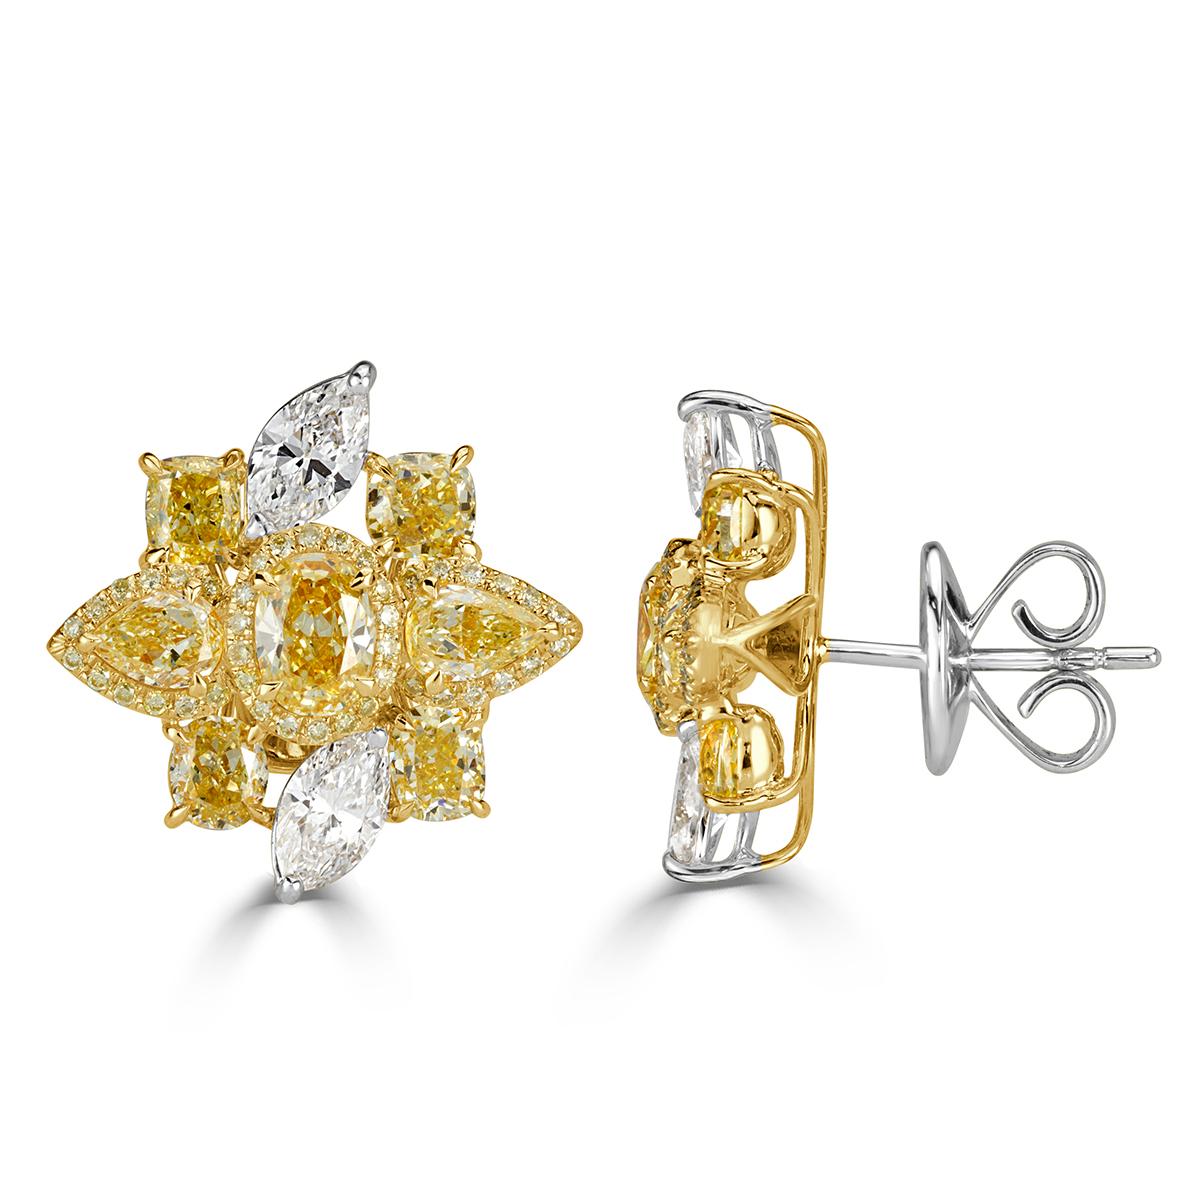 This gorgeous pair of diamond cluster earrings showcases a ravishing floral design of peerless white and fancy yellow diamonds of different shapes including pear, oval, marquise, cushion and round brilliant cut diamonds. The diamonds total 5.42ct in